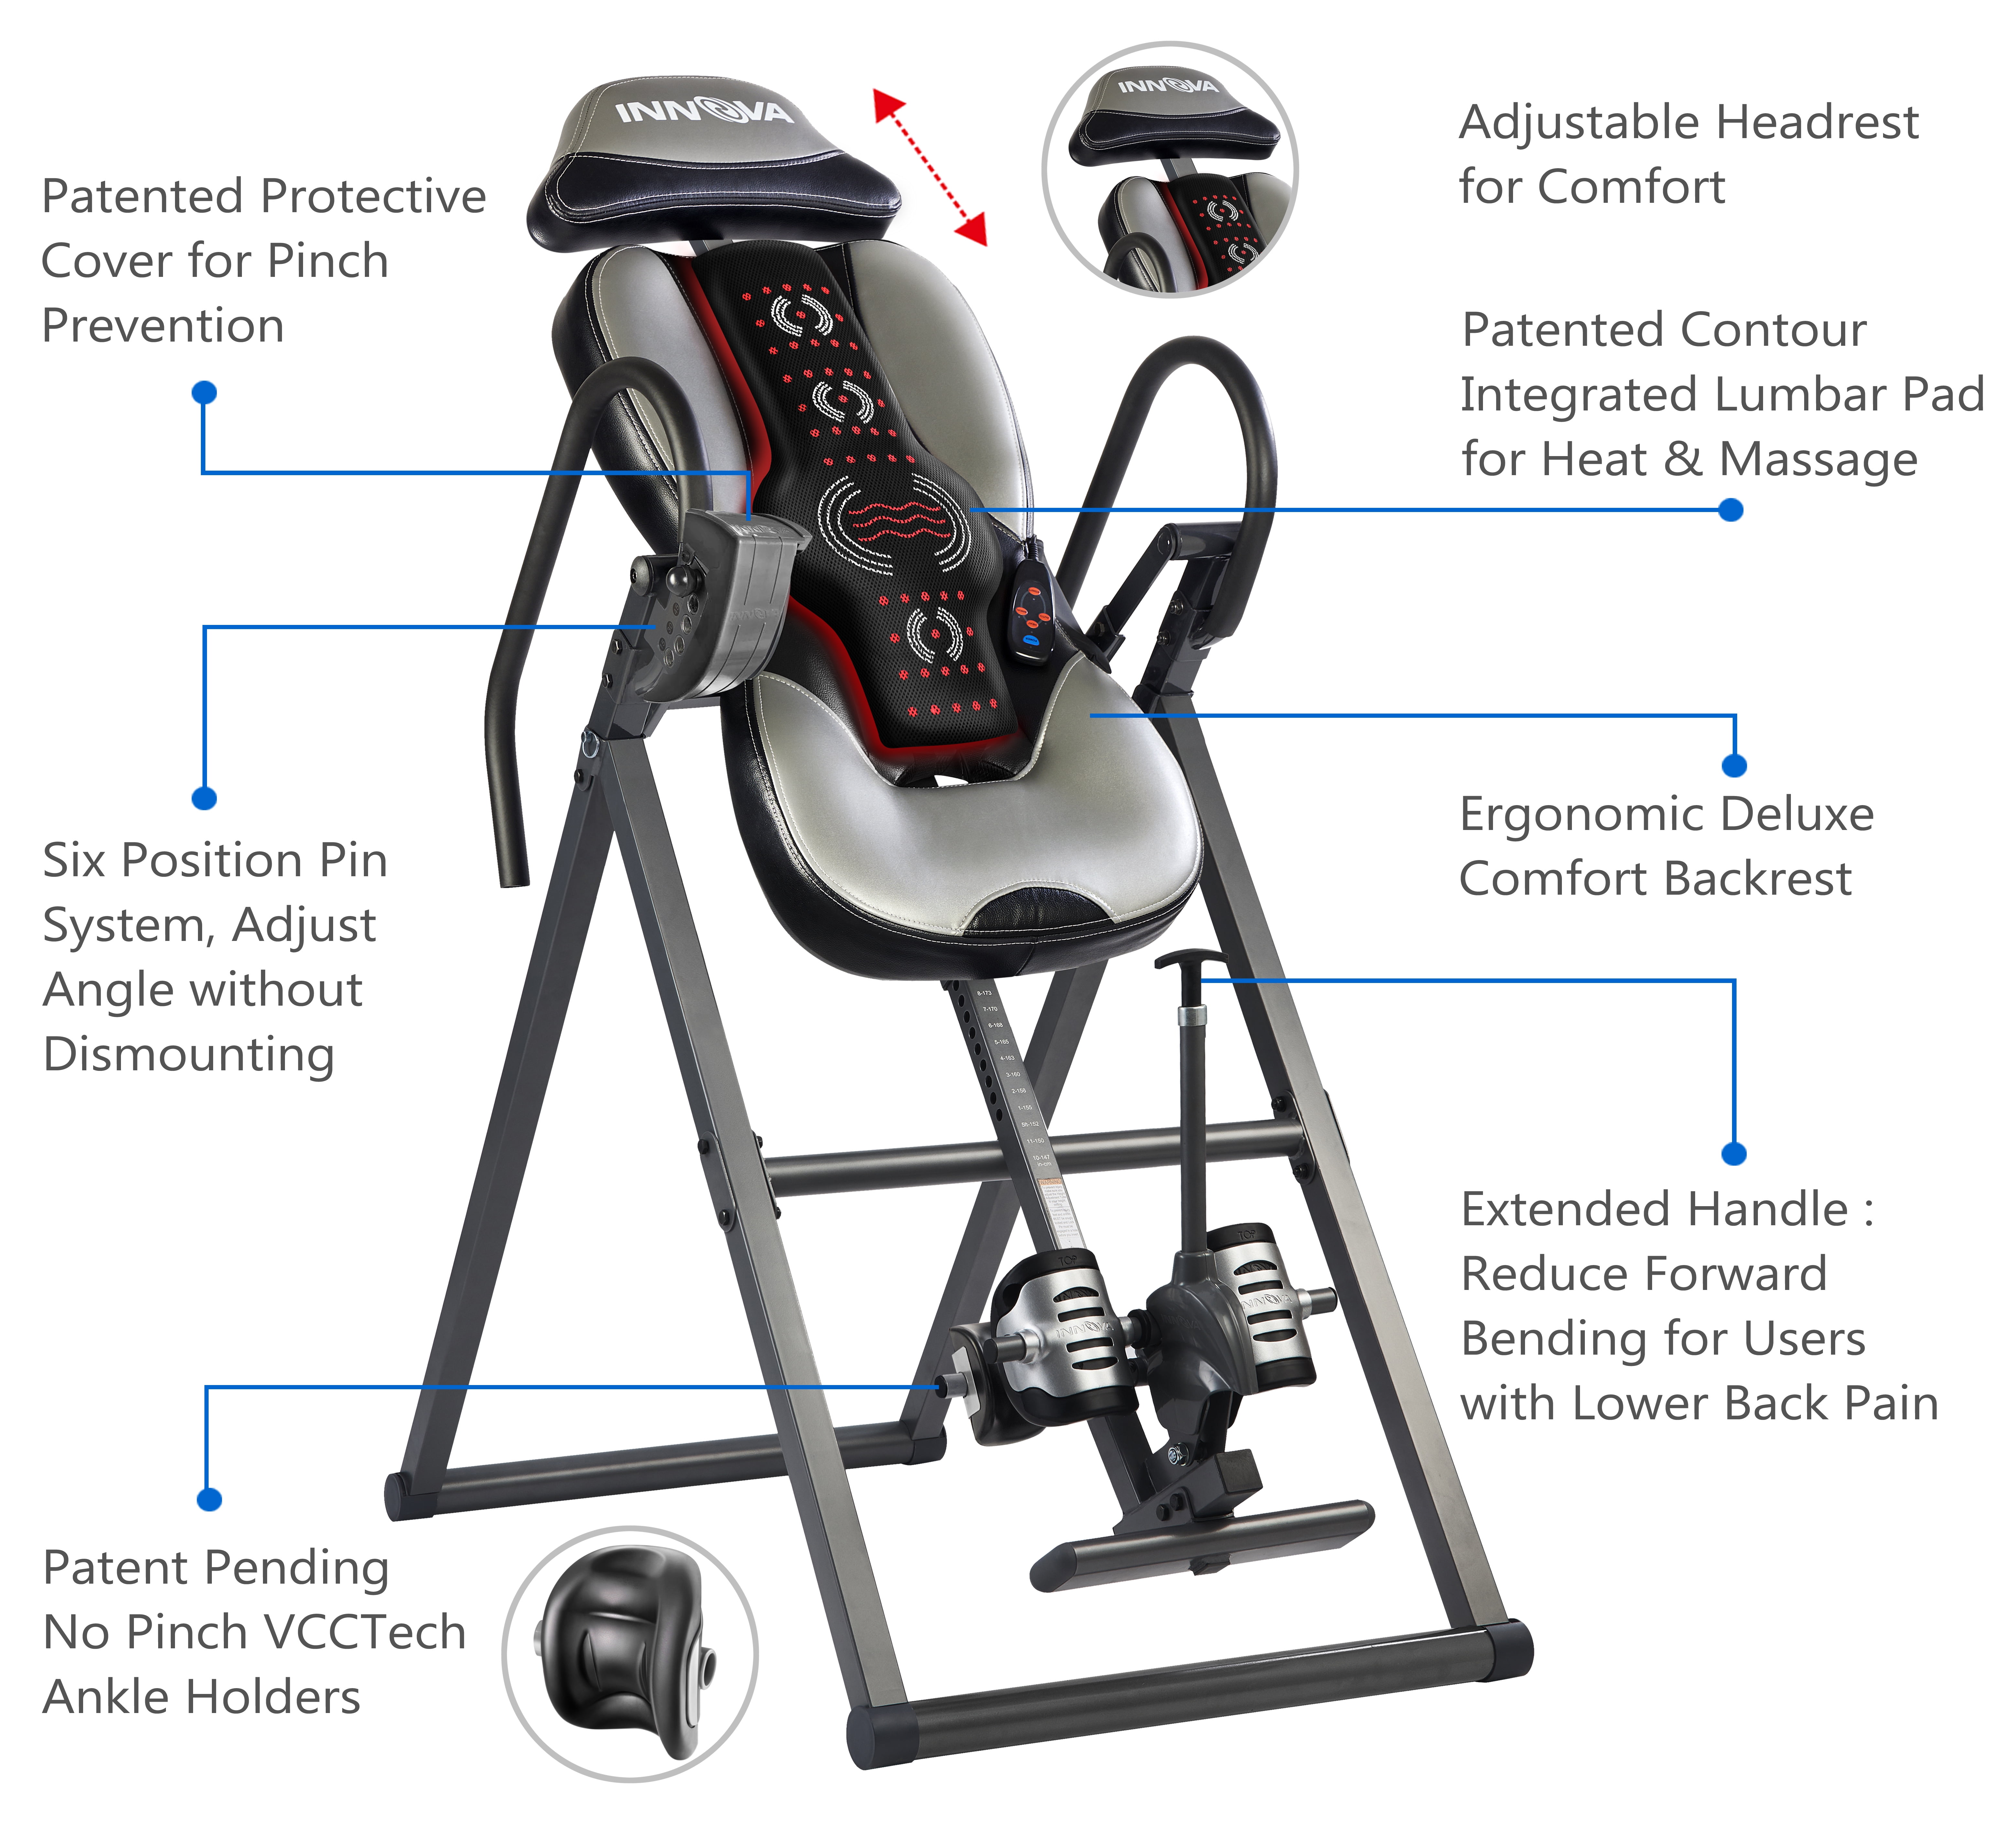 ITM5900 Advanced Heat and Massage Inversion Table 